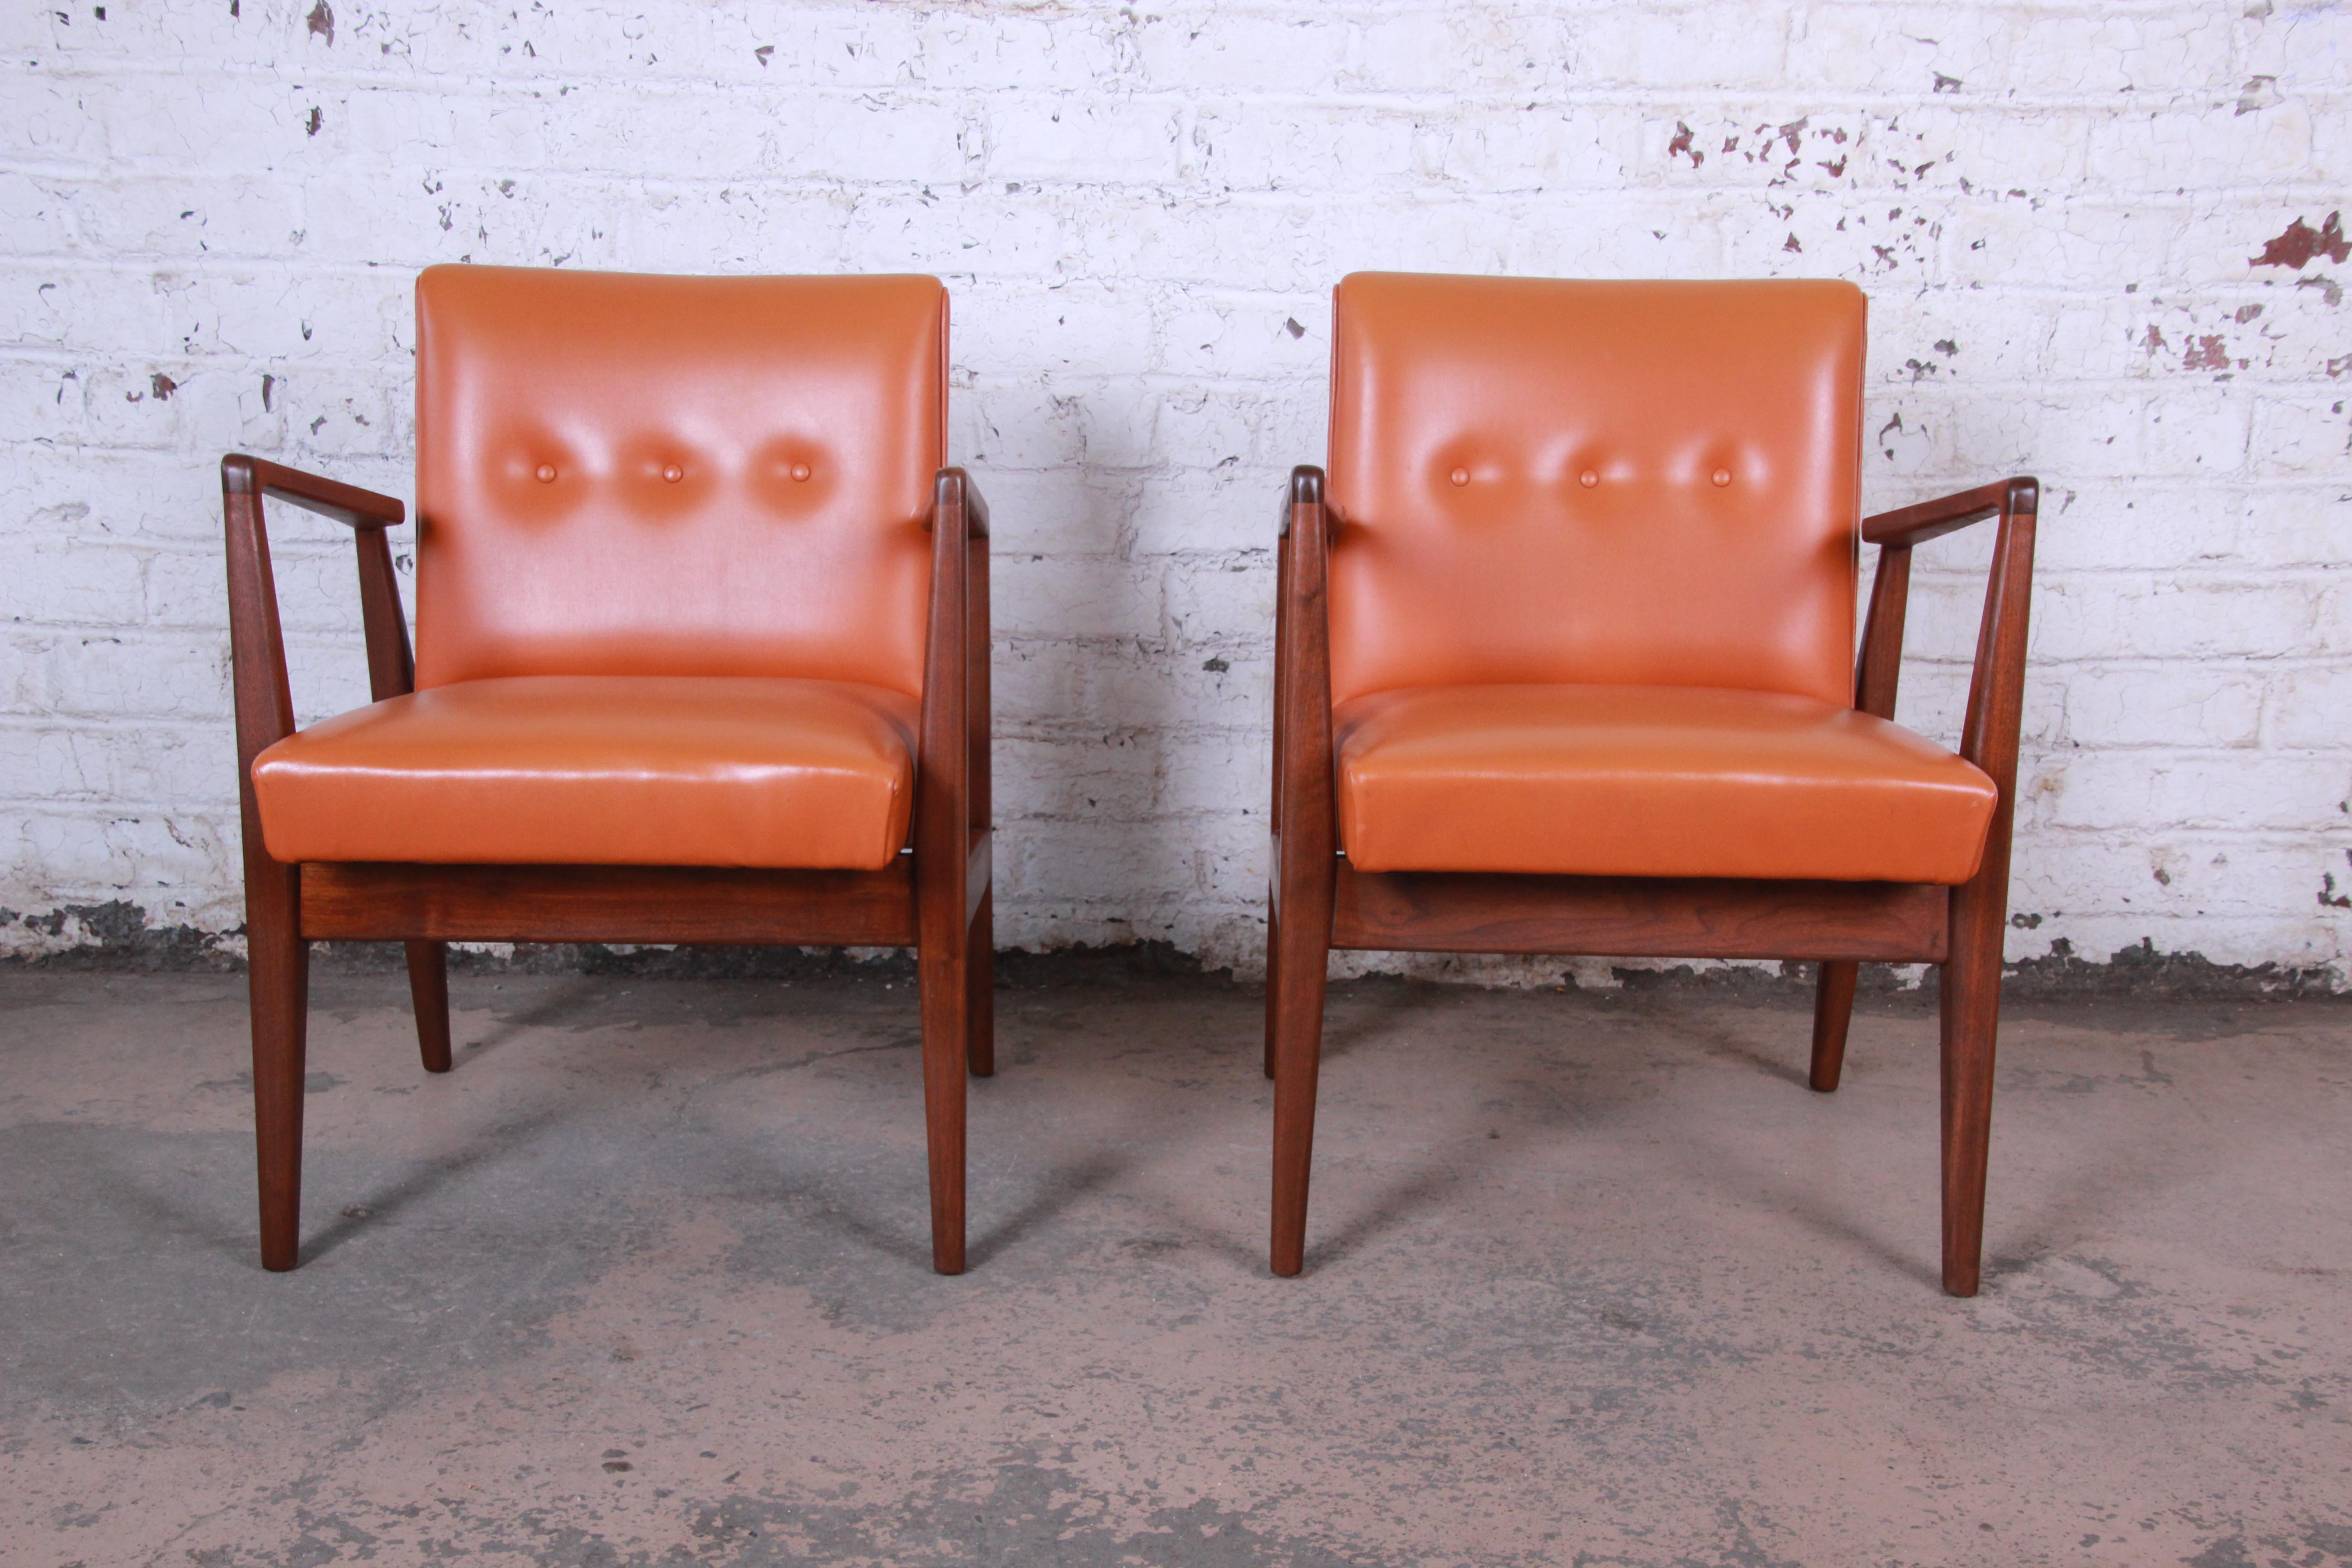 Mid-20th Century Jens Risom Mid-Century Modern Sculpted Walnut Lounge Chairs, Pair